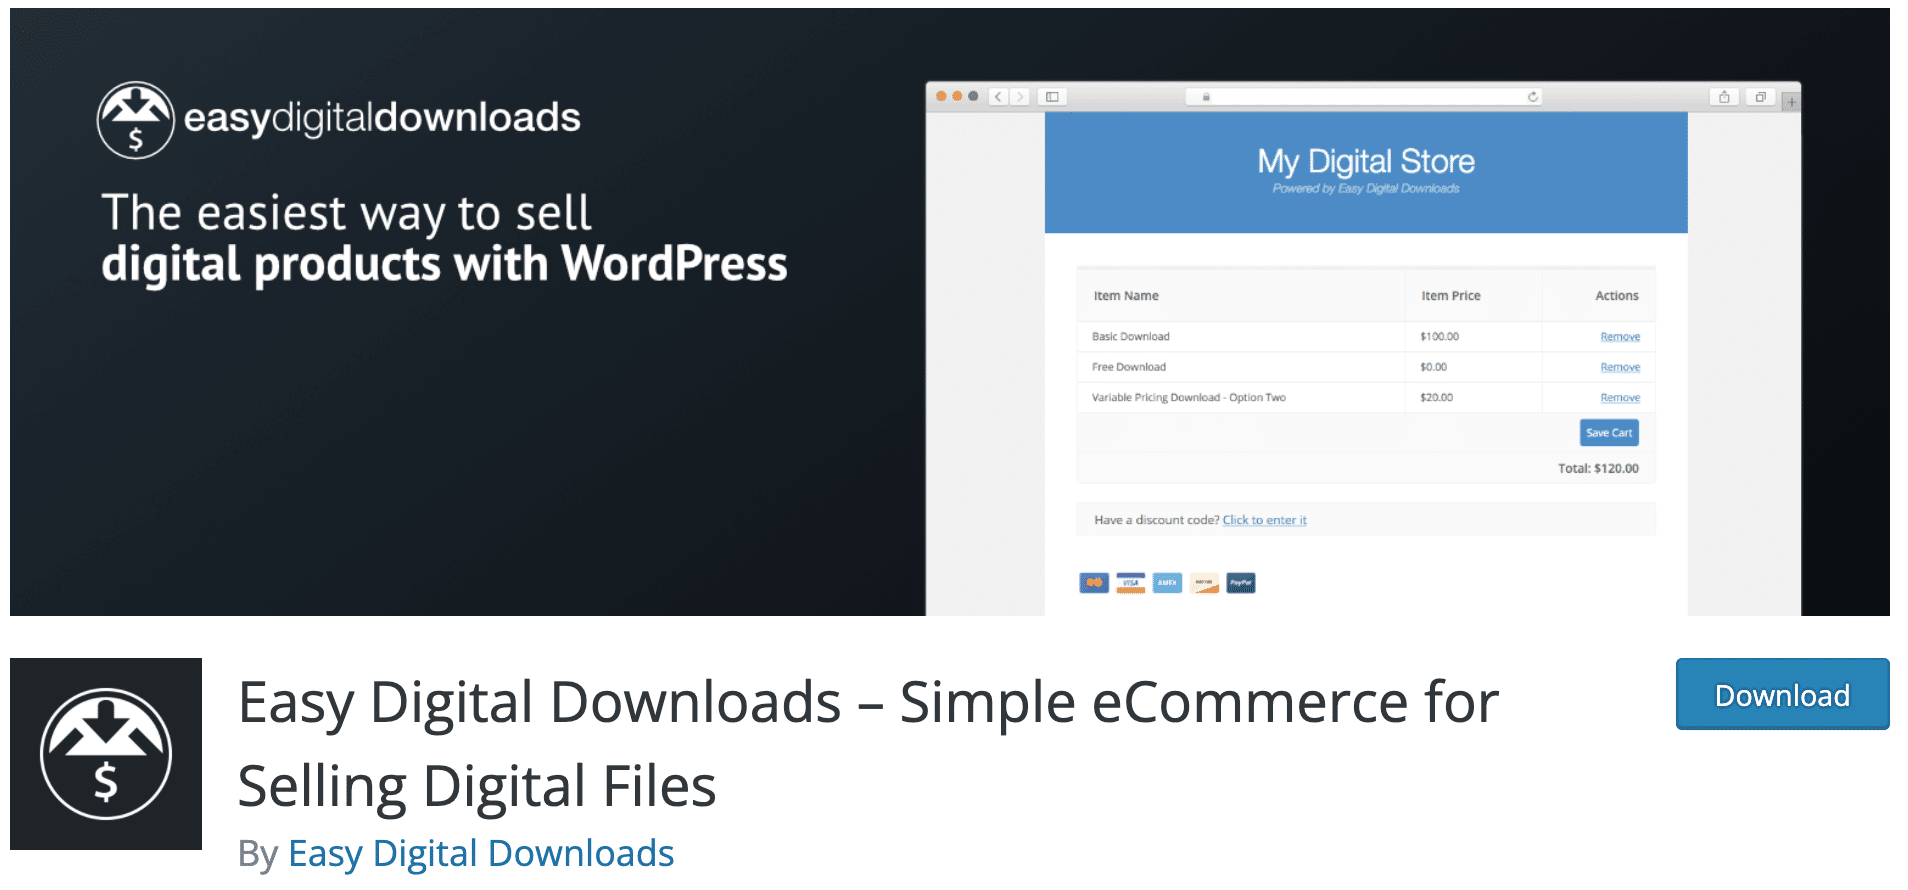 Easy Digital Downloads is an ecommerce plugin for selling digital products.